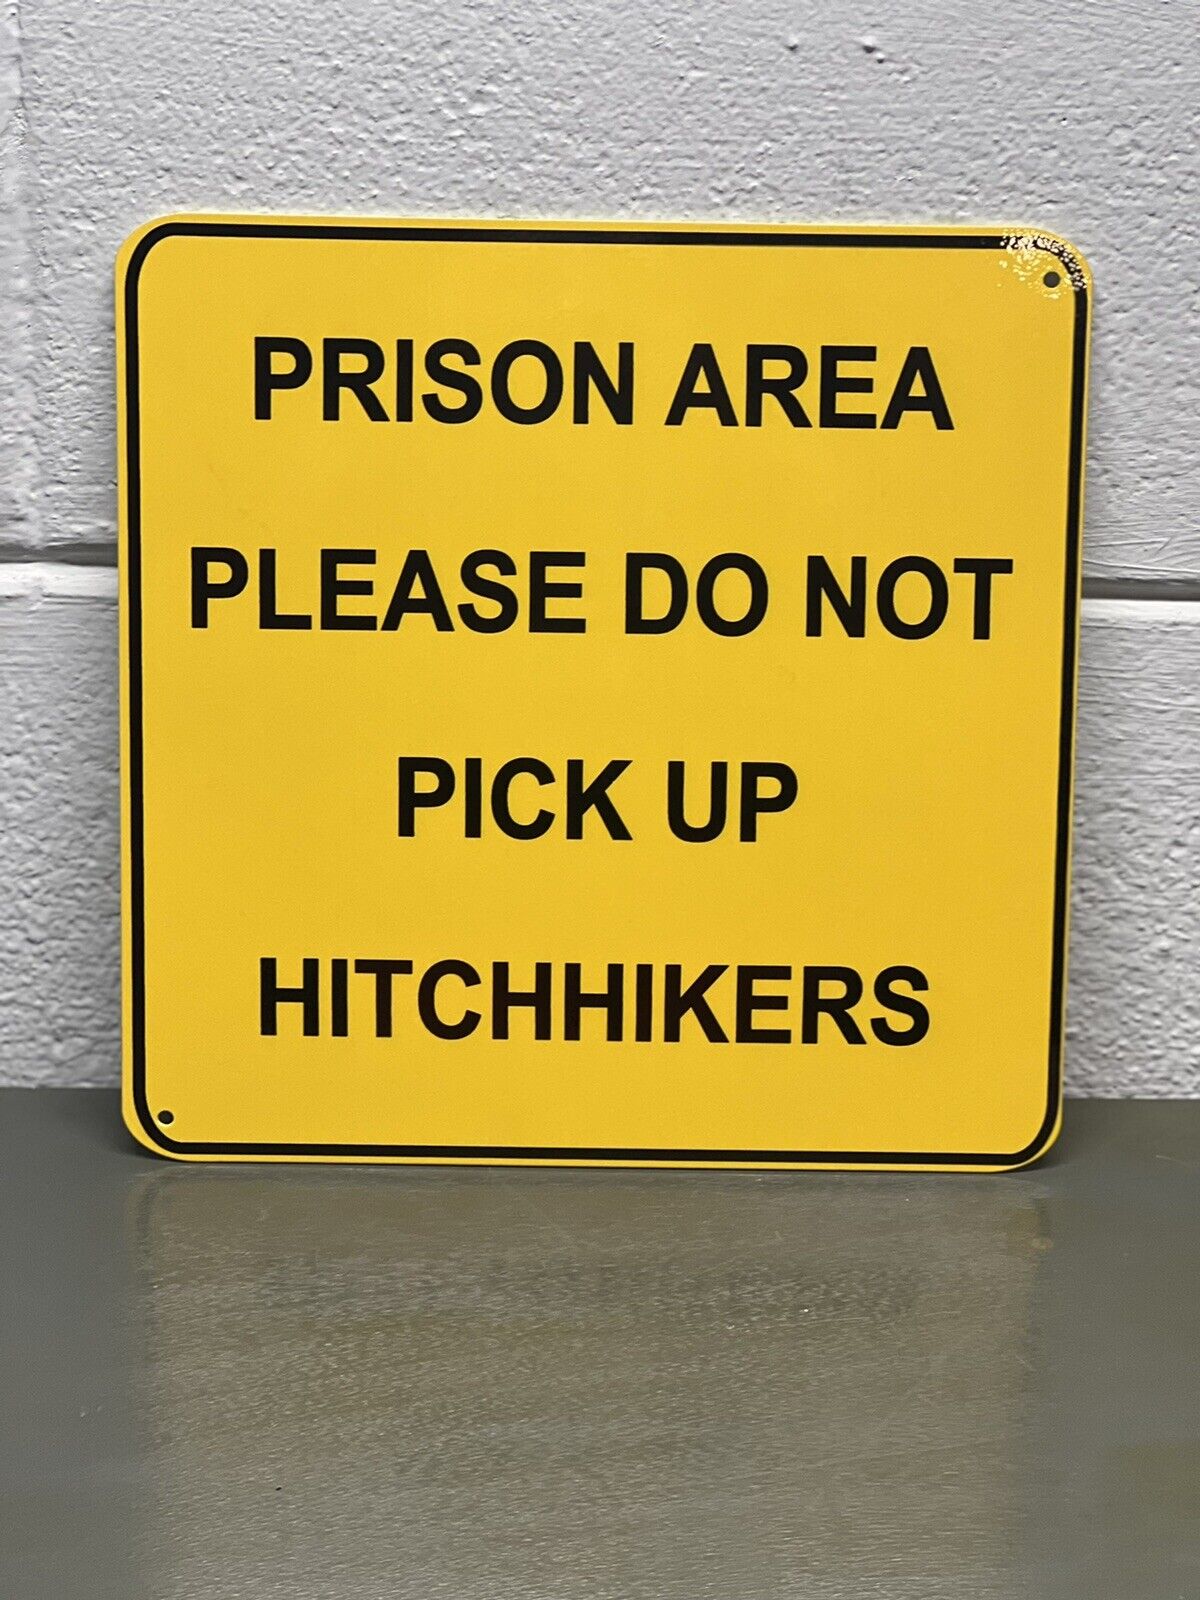 Prison Area Please Do Not Pick Up Hitchhikers Thick Metal Sign Criminal Gas Oil